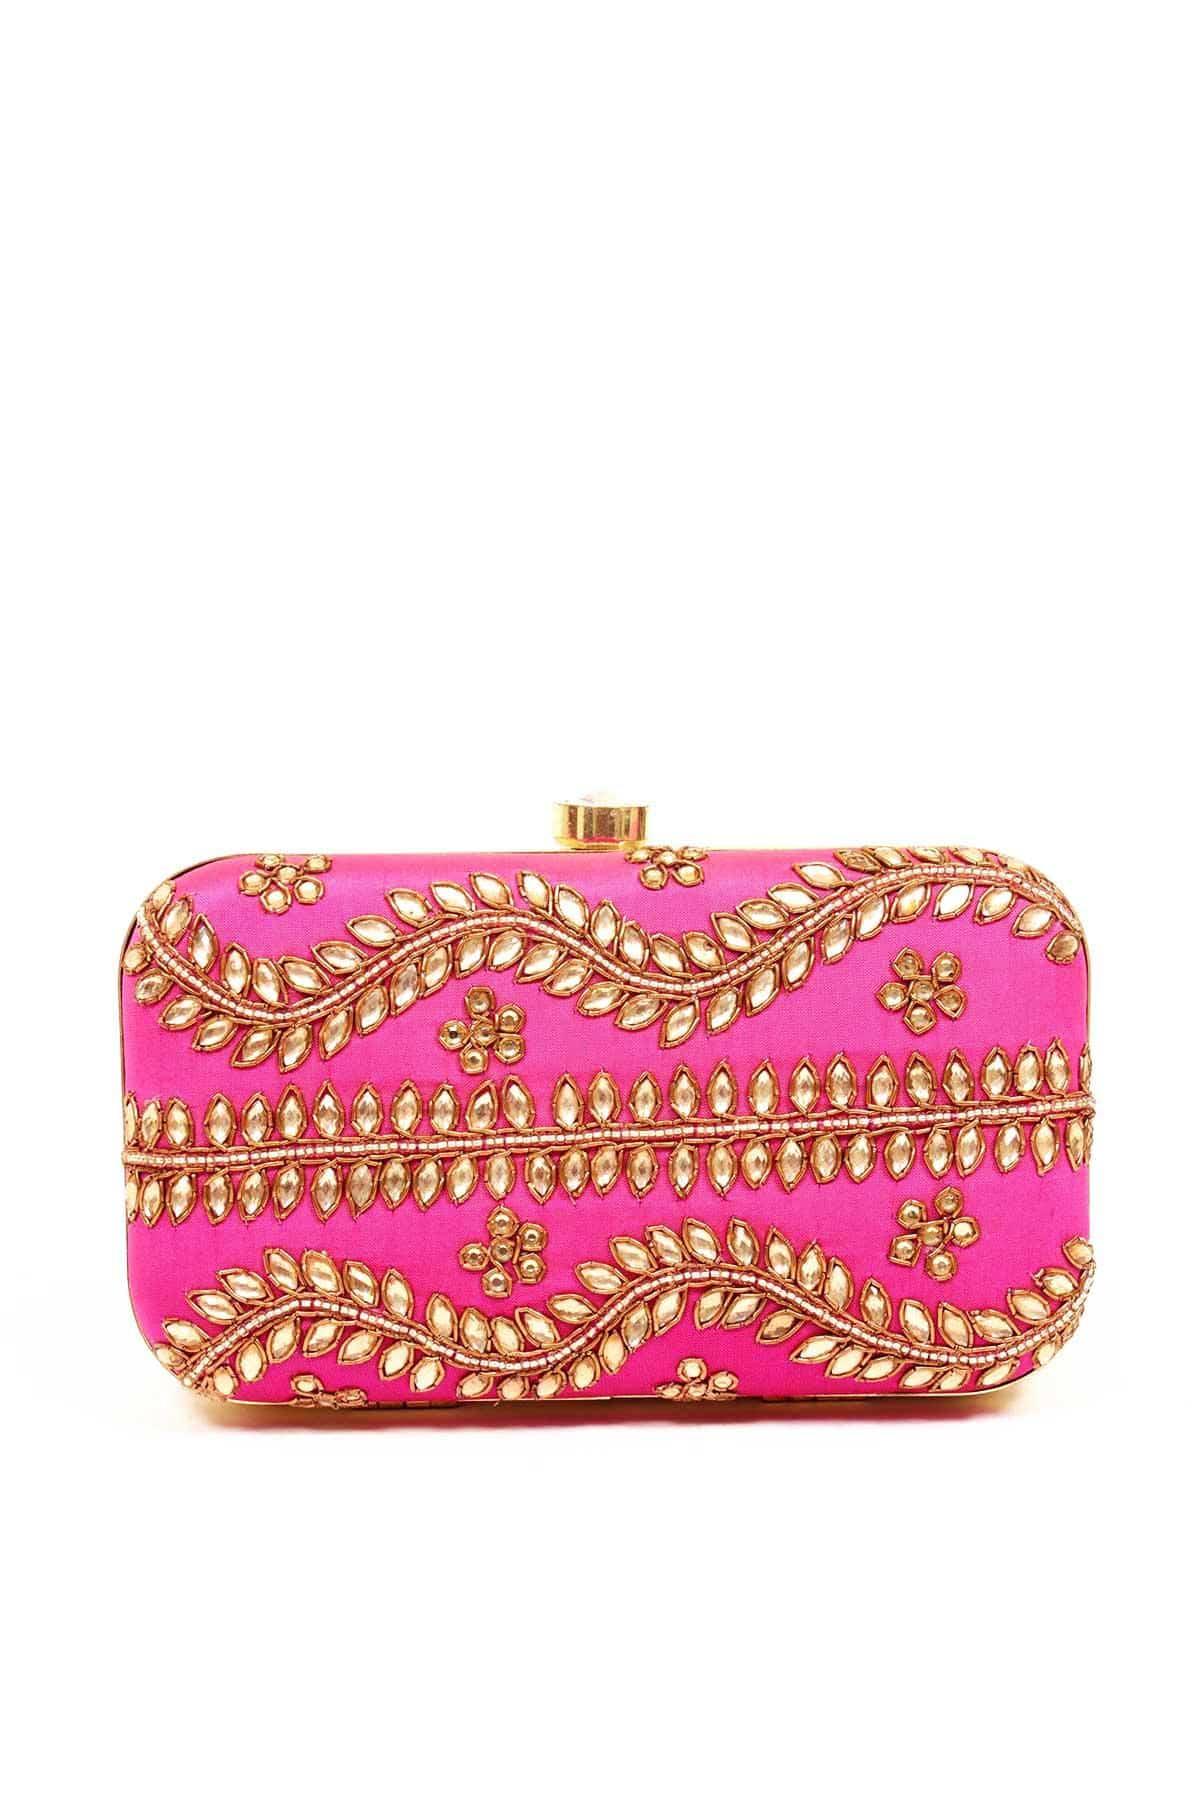 Two-Tone Glitter Clutch Purse for Women Evening Bag India | Ubuy